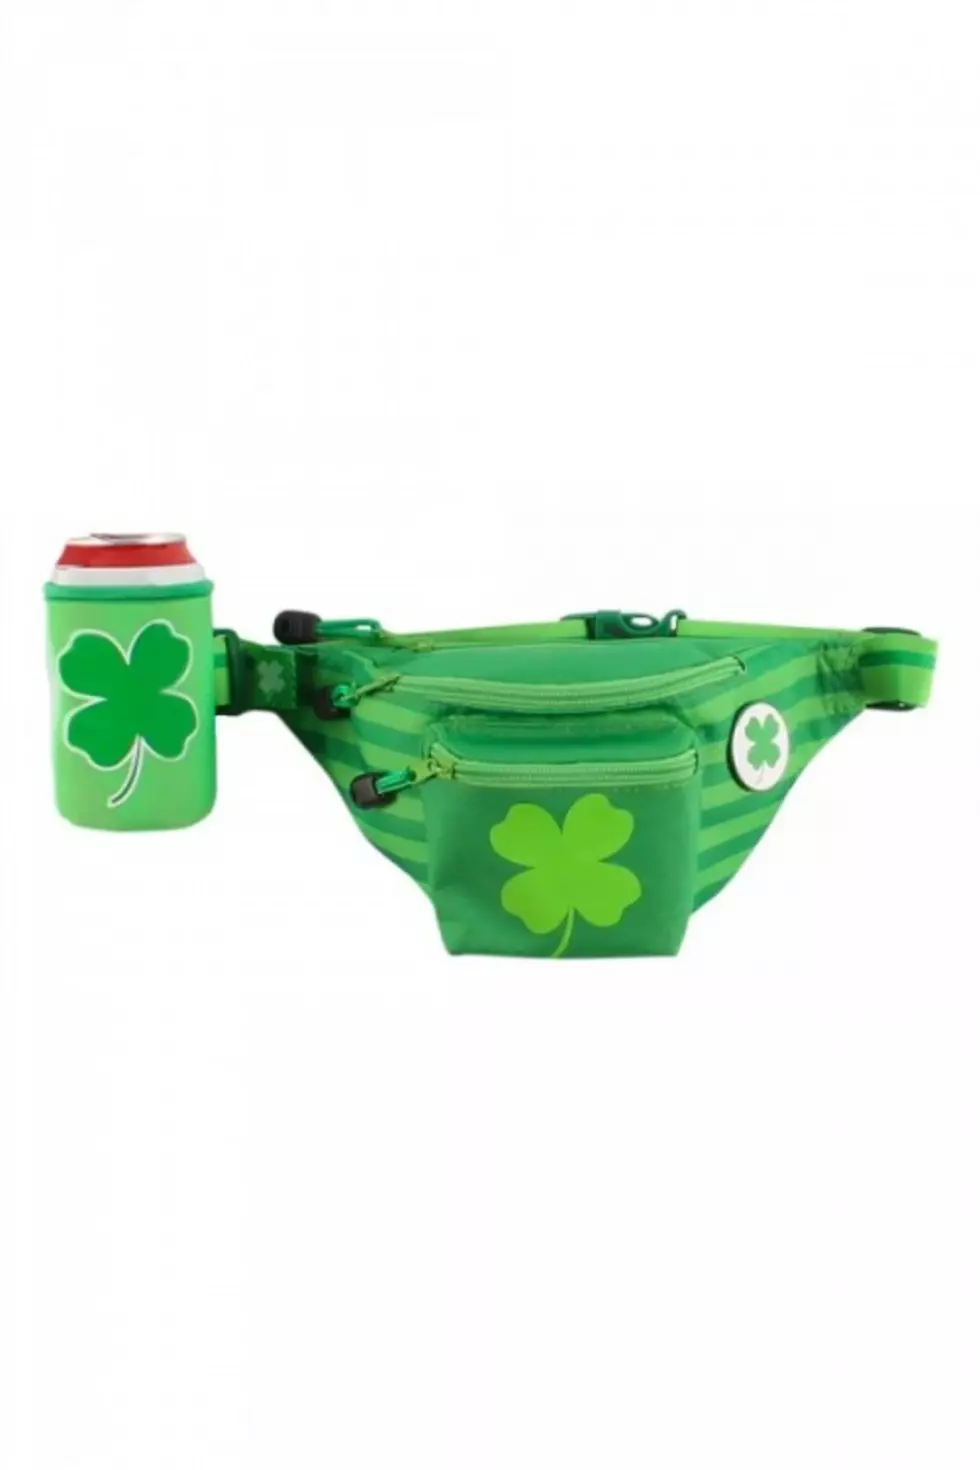 This May Be The Perfect St. Patrick’s Day Accessory